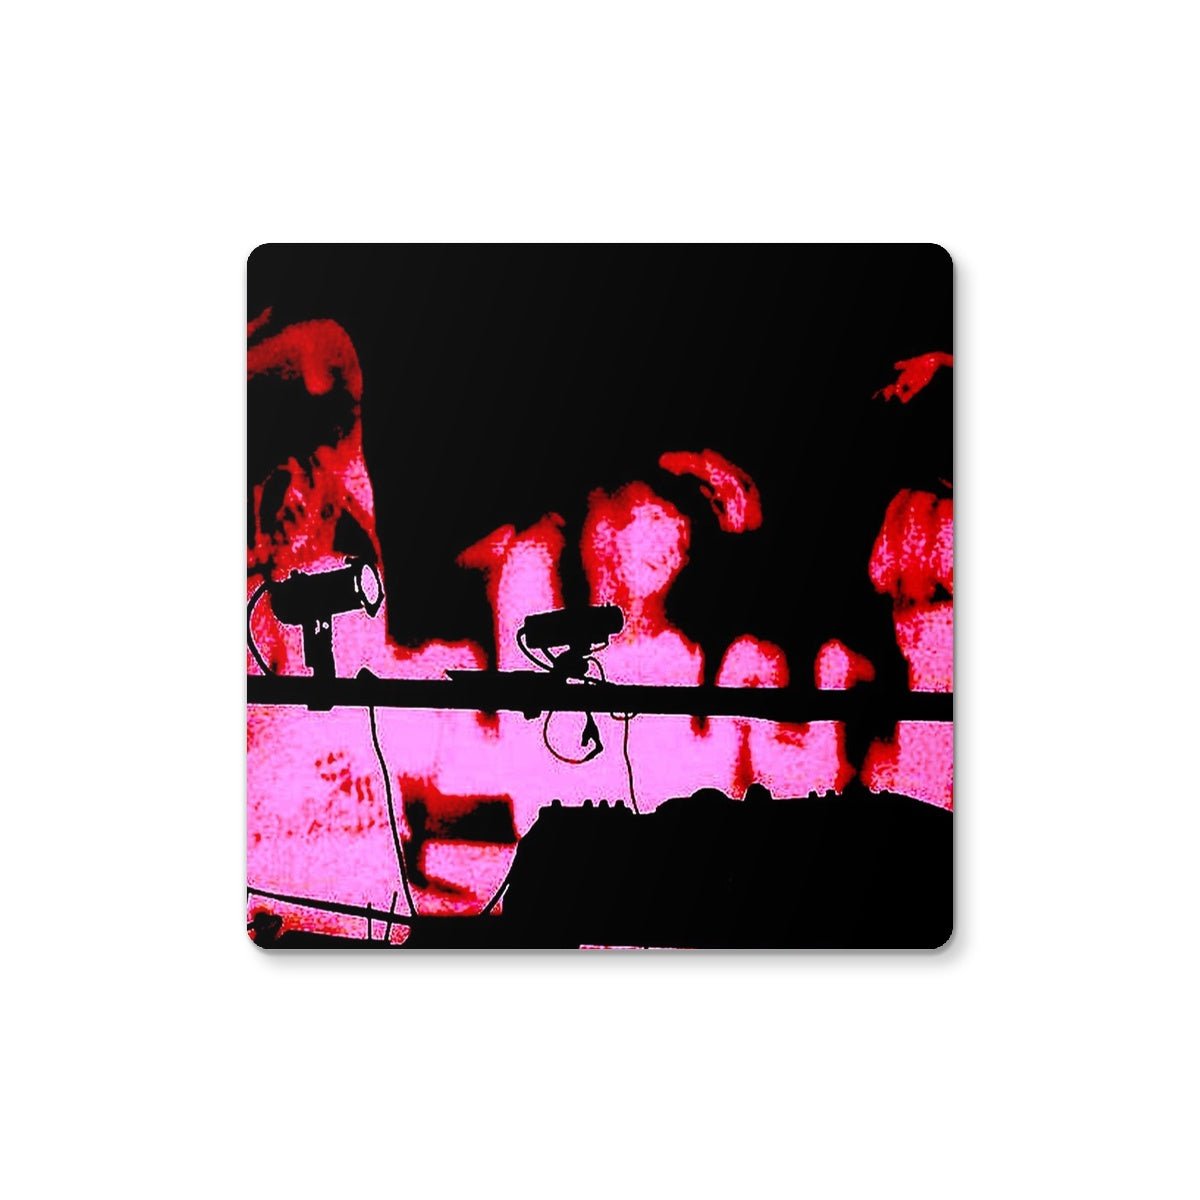 Dancing With The Devils Art Gifts Coaster-Coasters-Abstract & Impressionistic Art Gallery-Single Coaster-Paintings, Prints, Homeware, Art Gifts From Scotland By Scottish Artist Kevin Hunter